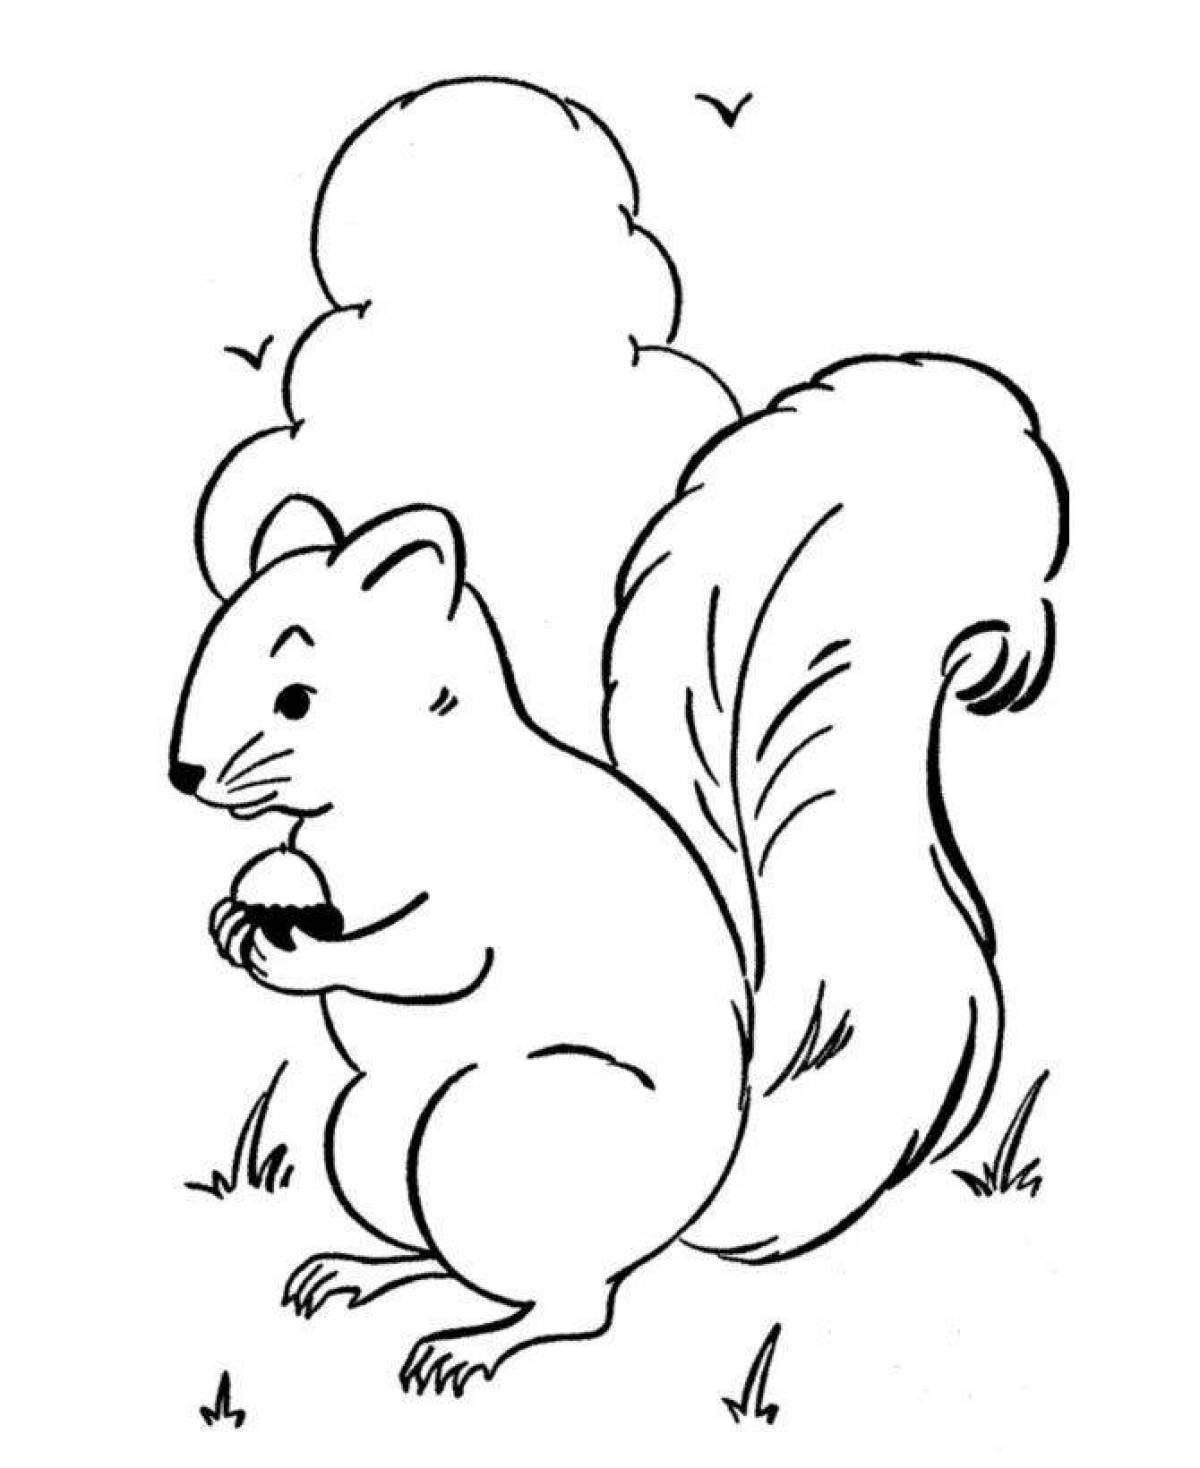 Fancy squirrel coloring book for kids